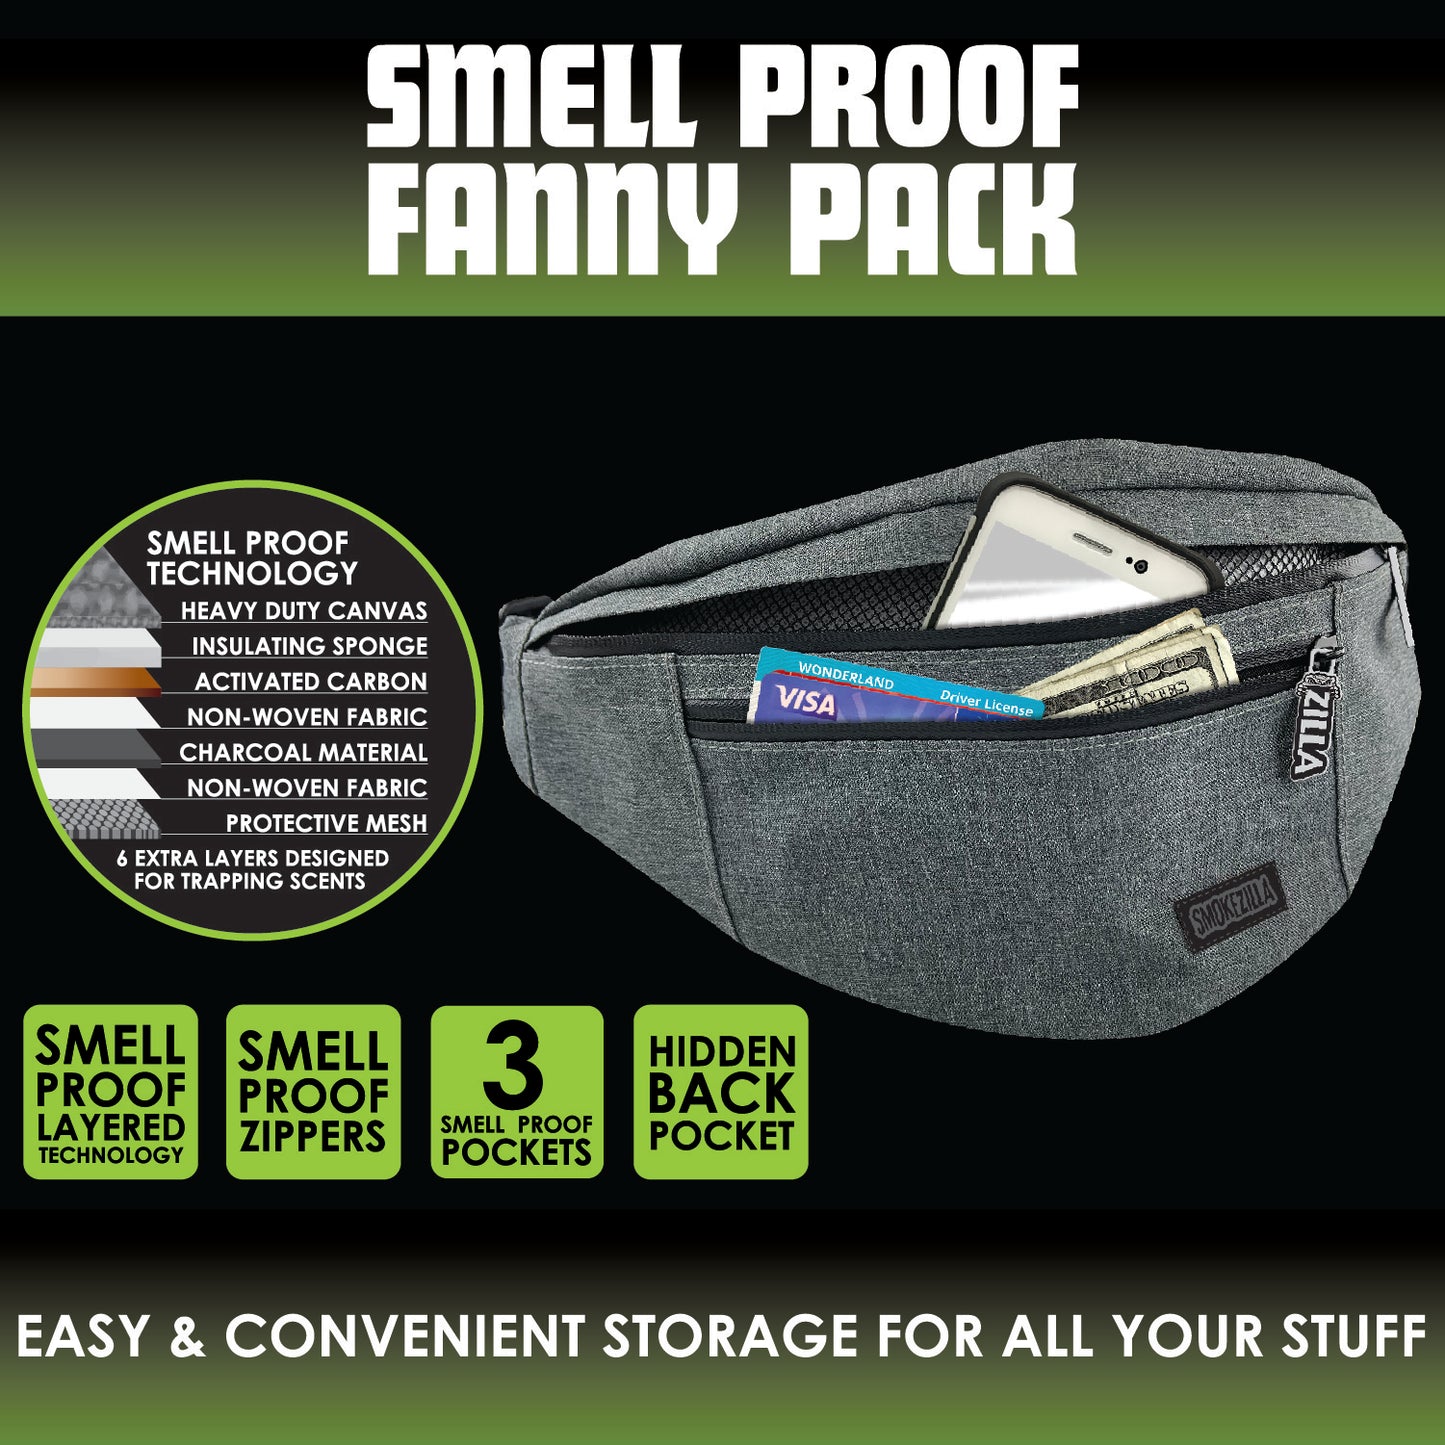 ITEM NUMBER 023190 SMELL PROOF FANNY PACK BAG 6 PIECES PER DISPLAY